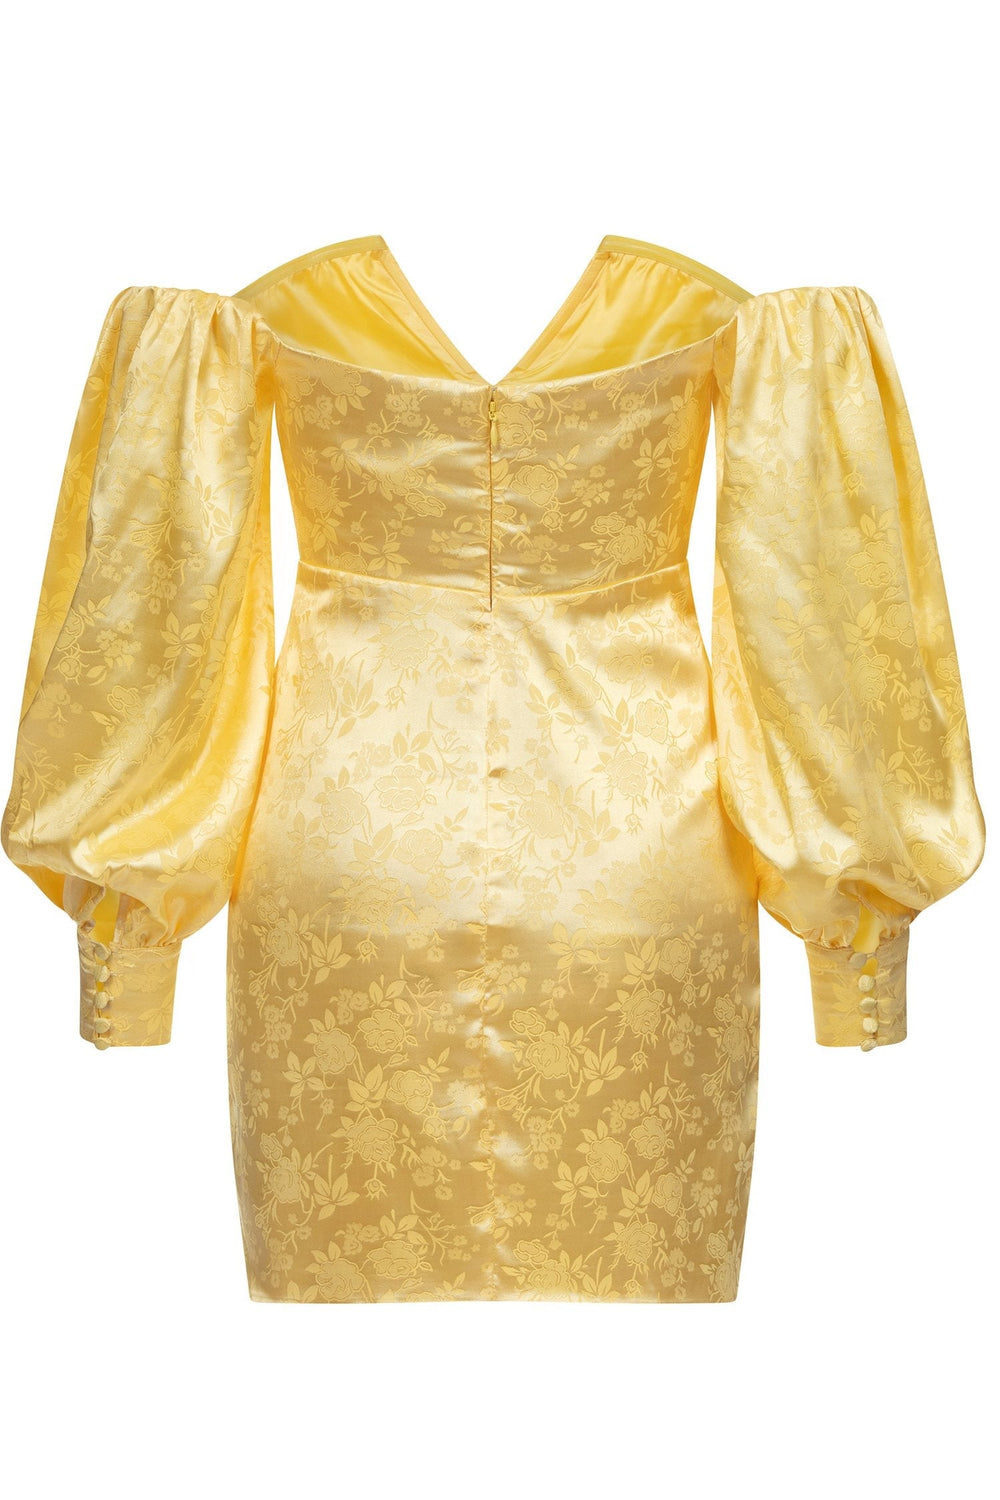 Zehra Dress - Yellow Satin Textured Mini with Long Off-Shoulder Sleeves